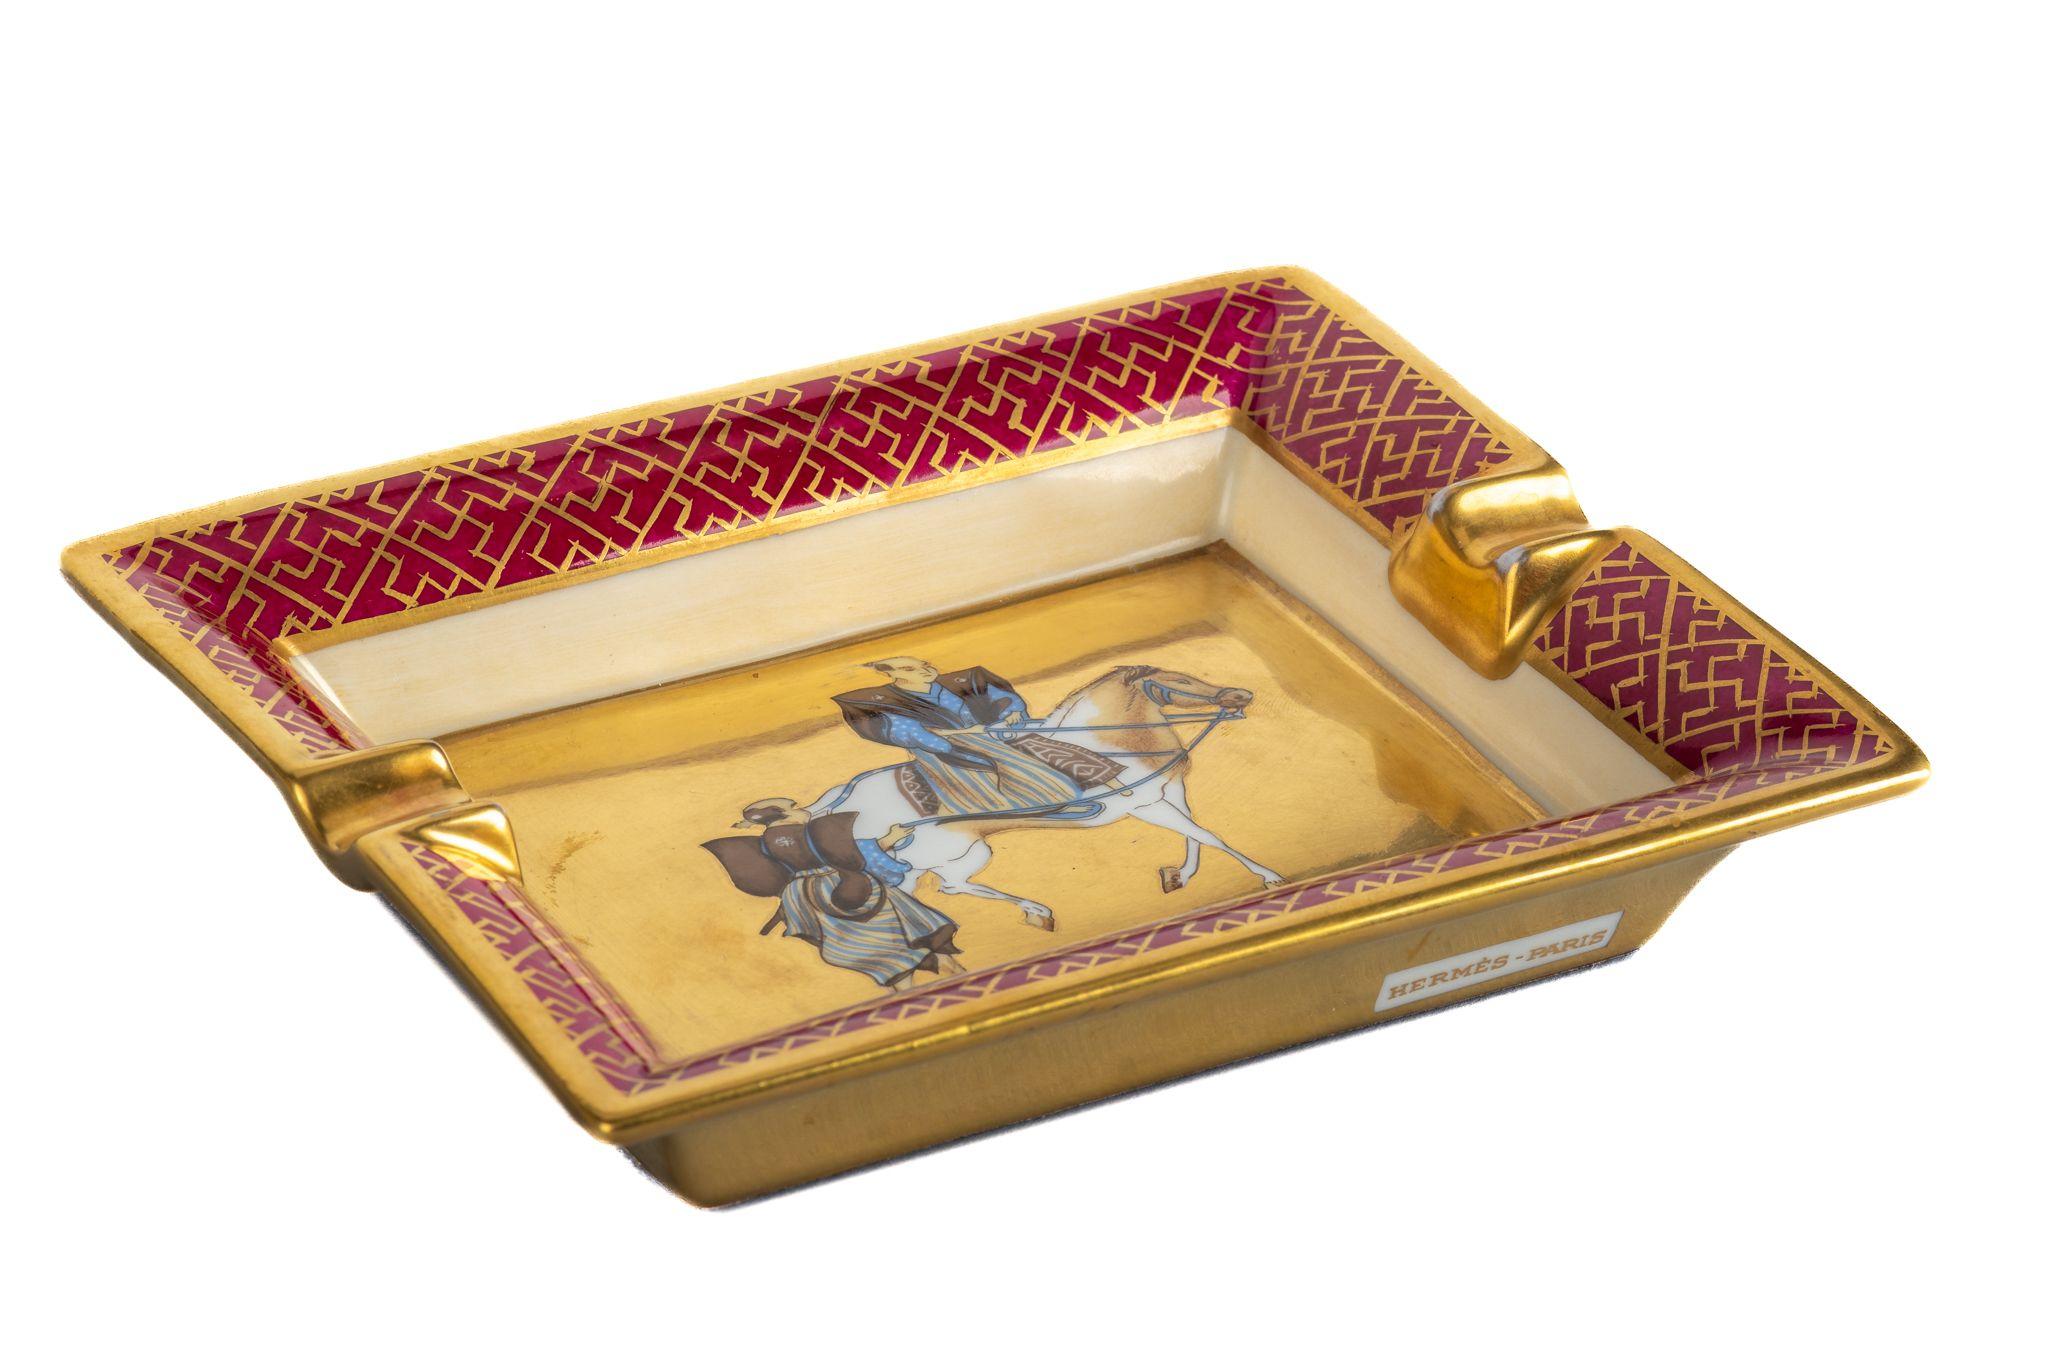 Hermes signature ashtray with samurai design in red and gold. Suede stamped bottom. Minor wear on it. Made in France.